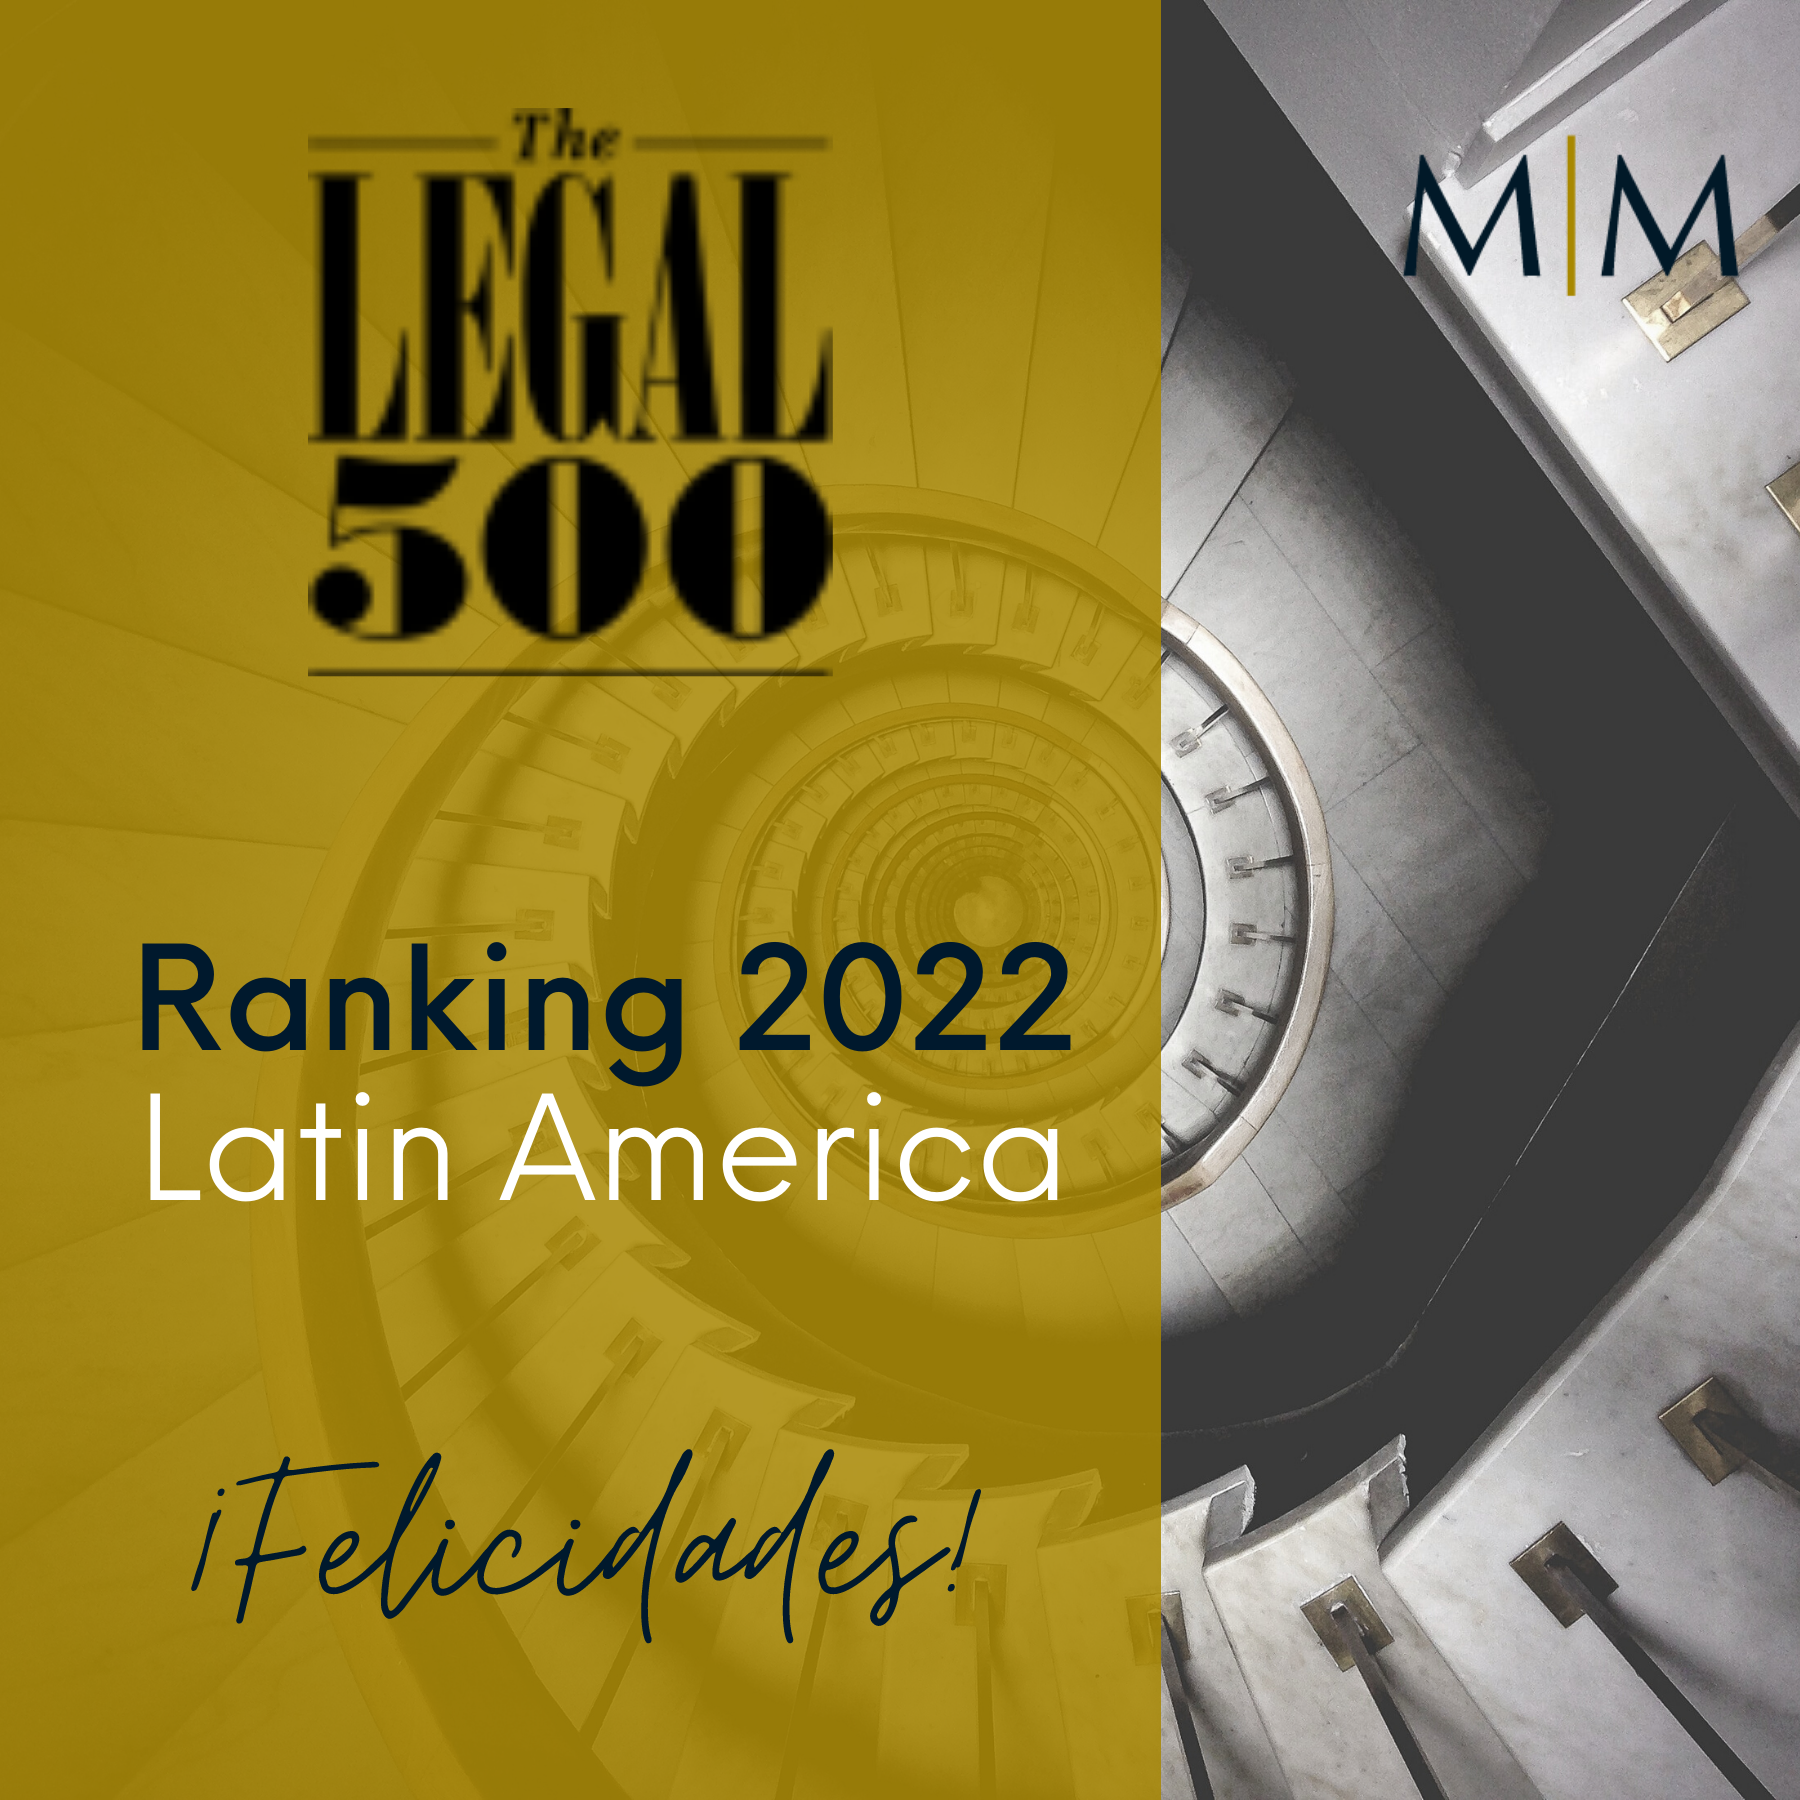 You are currently viewing M&M Recognition- The Legal 500.